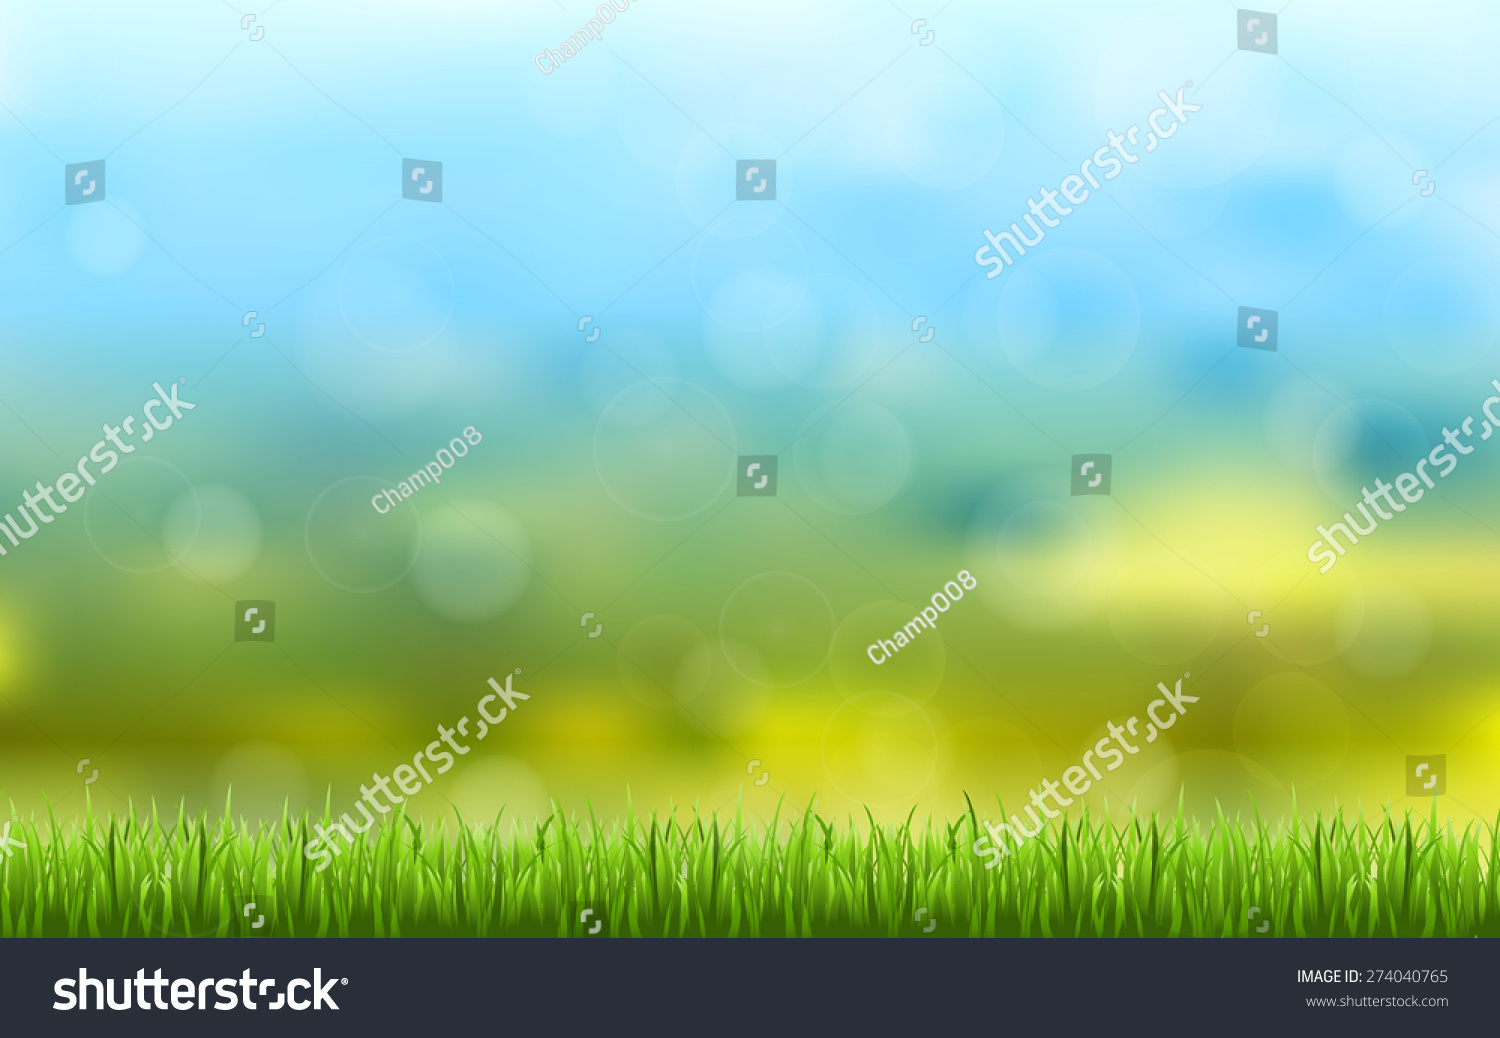 Abstract Bokeh And Lens Flare Pattern With Natural Green Grass And Blue ...